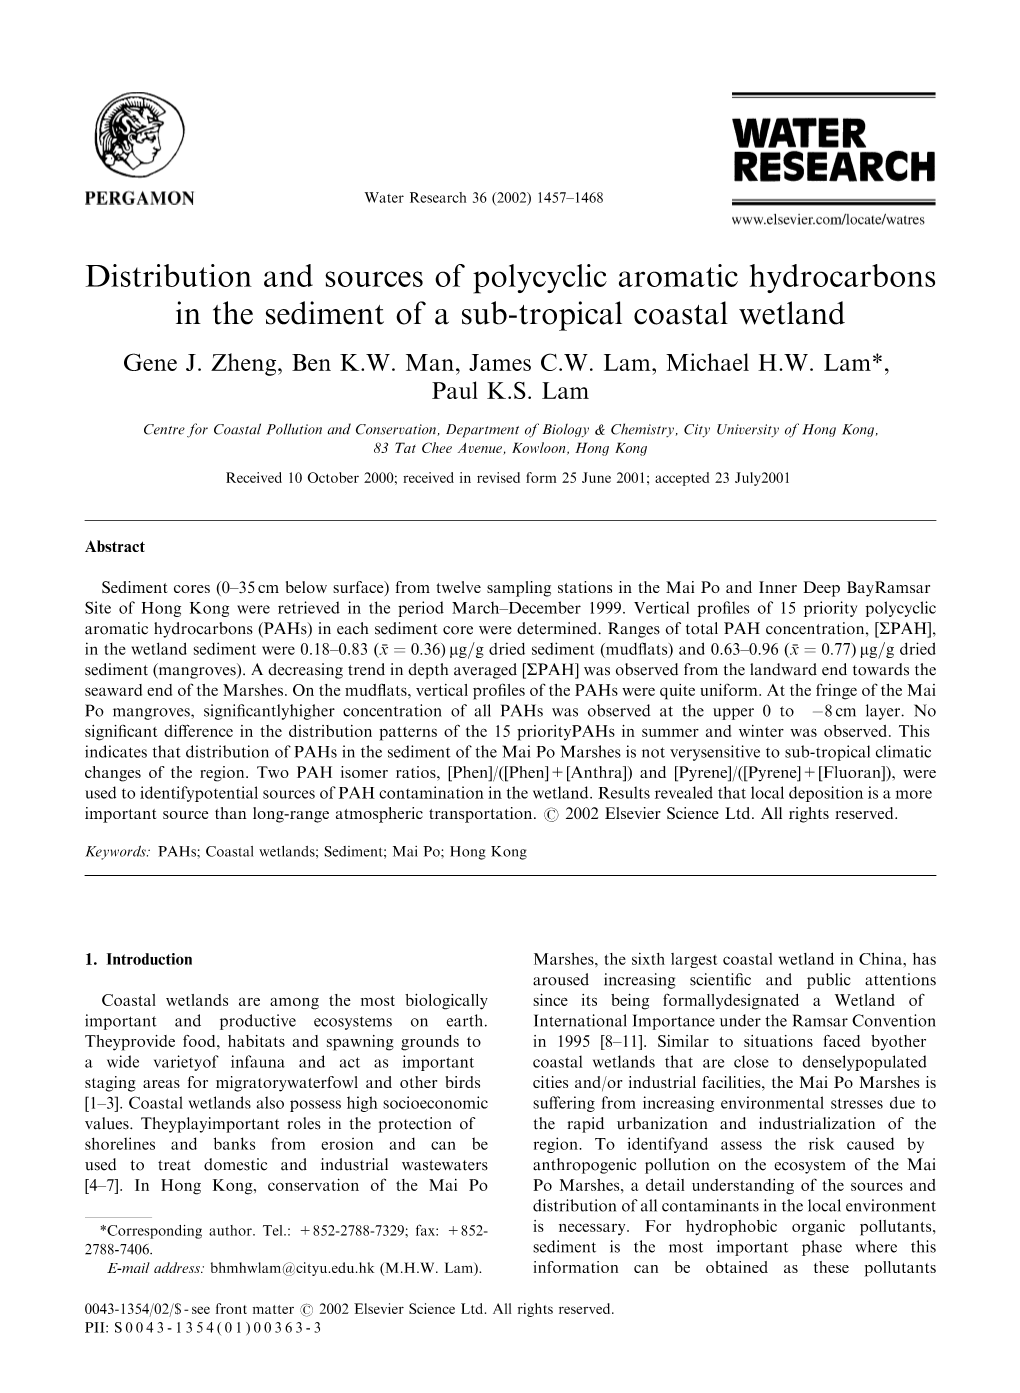 Distribution and Sources of Polycyclic Aromatic Hydrocarbons in the Sediment of a Sub-Tropical Coastal Wetland Gene J